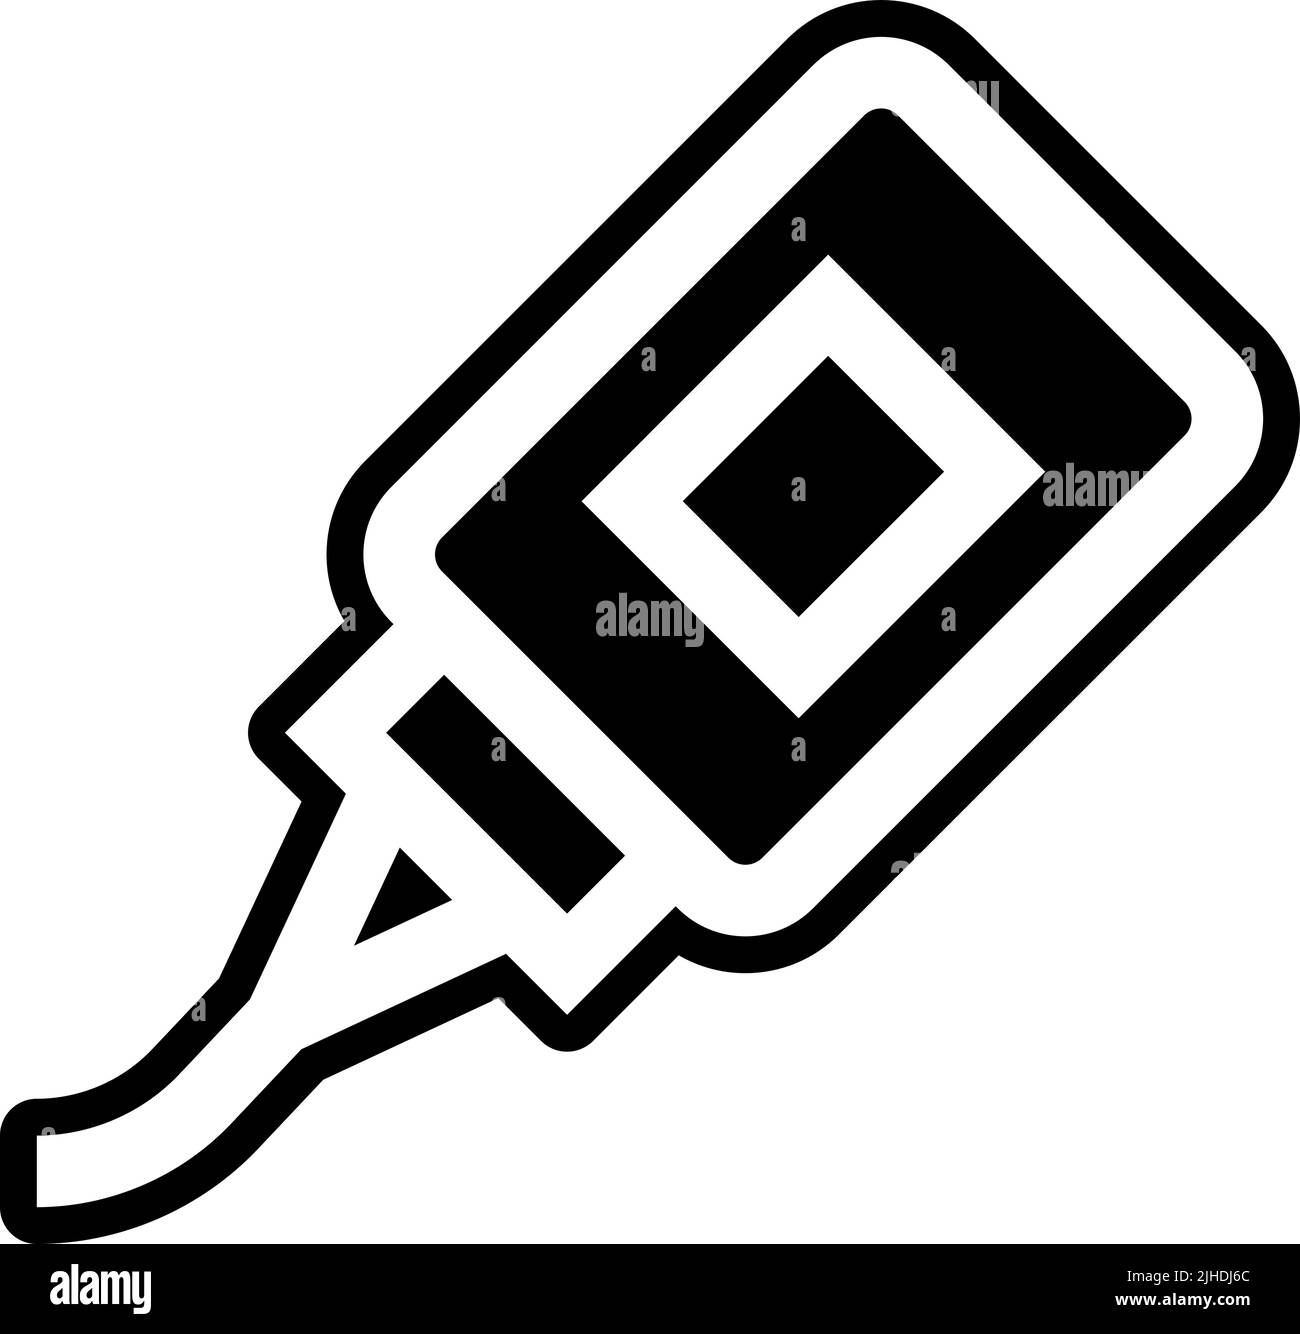 Diy and crafts glue . Stock Vector